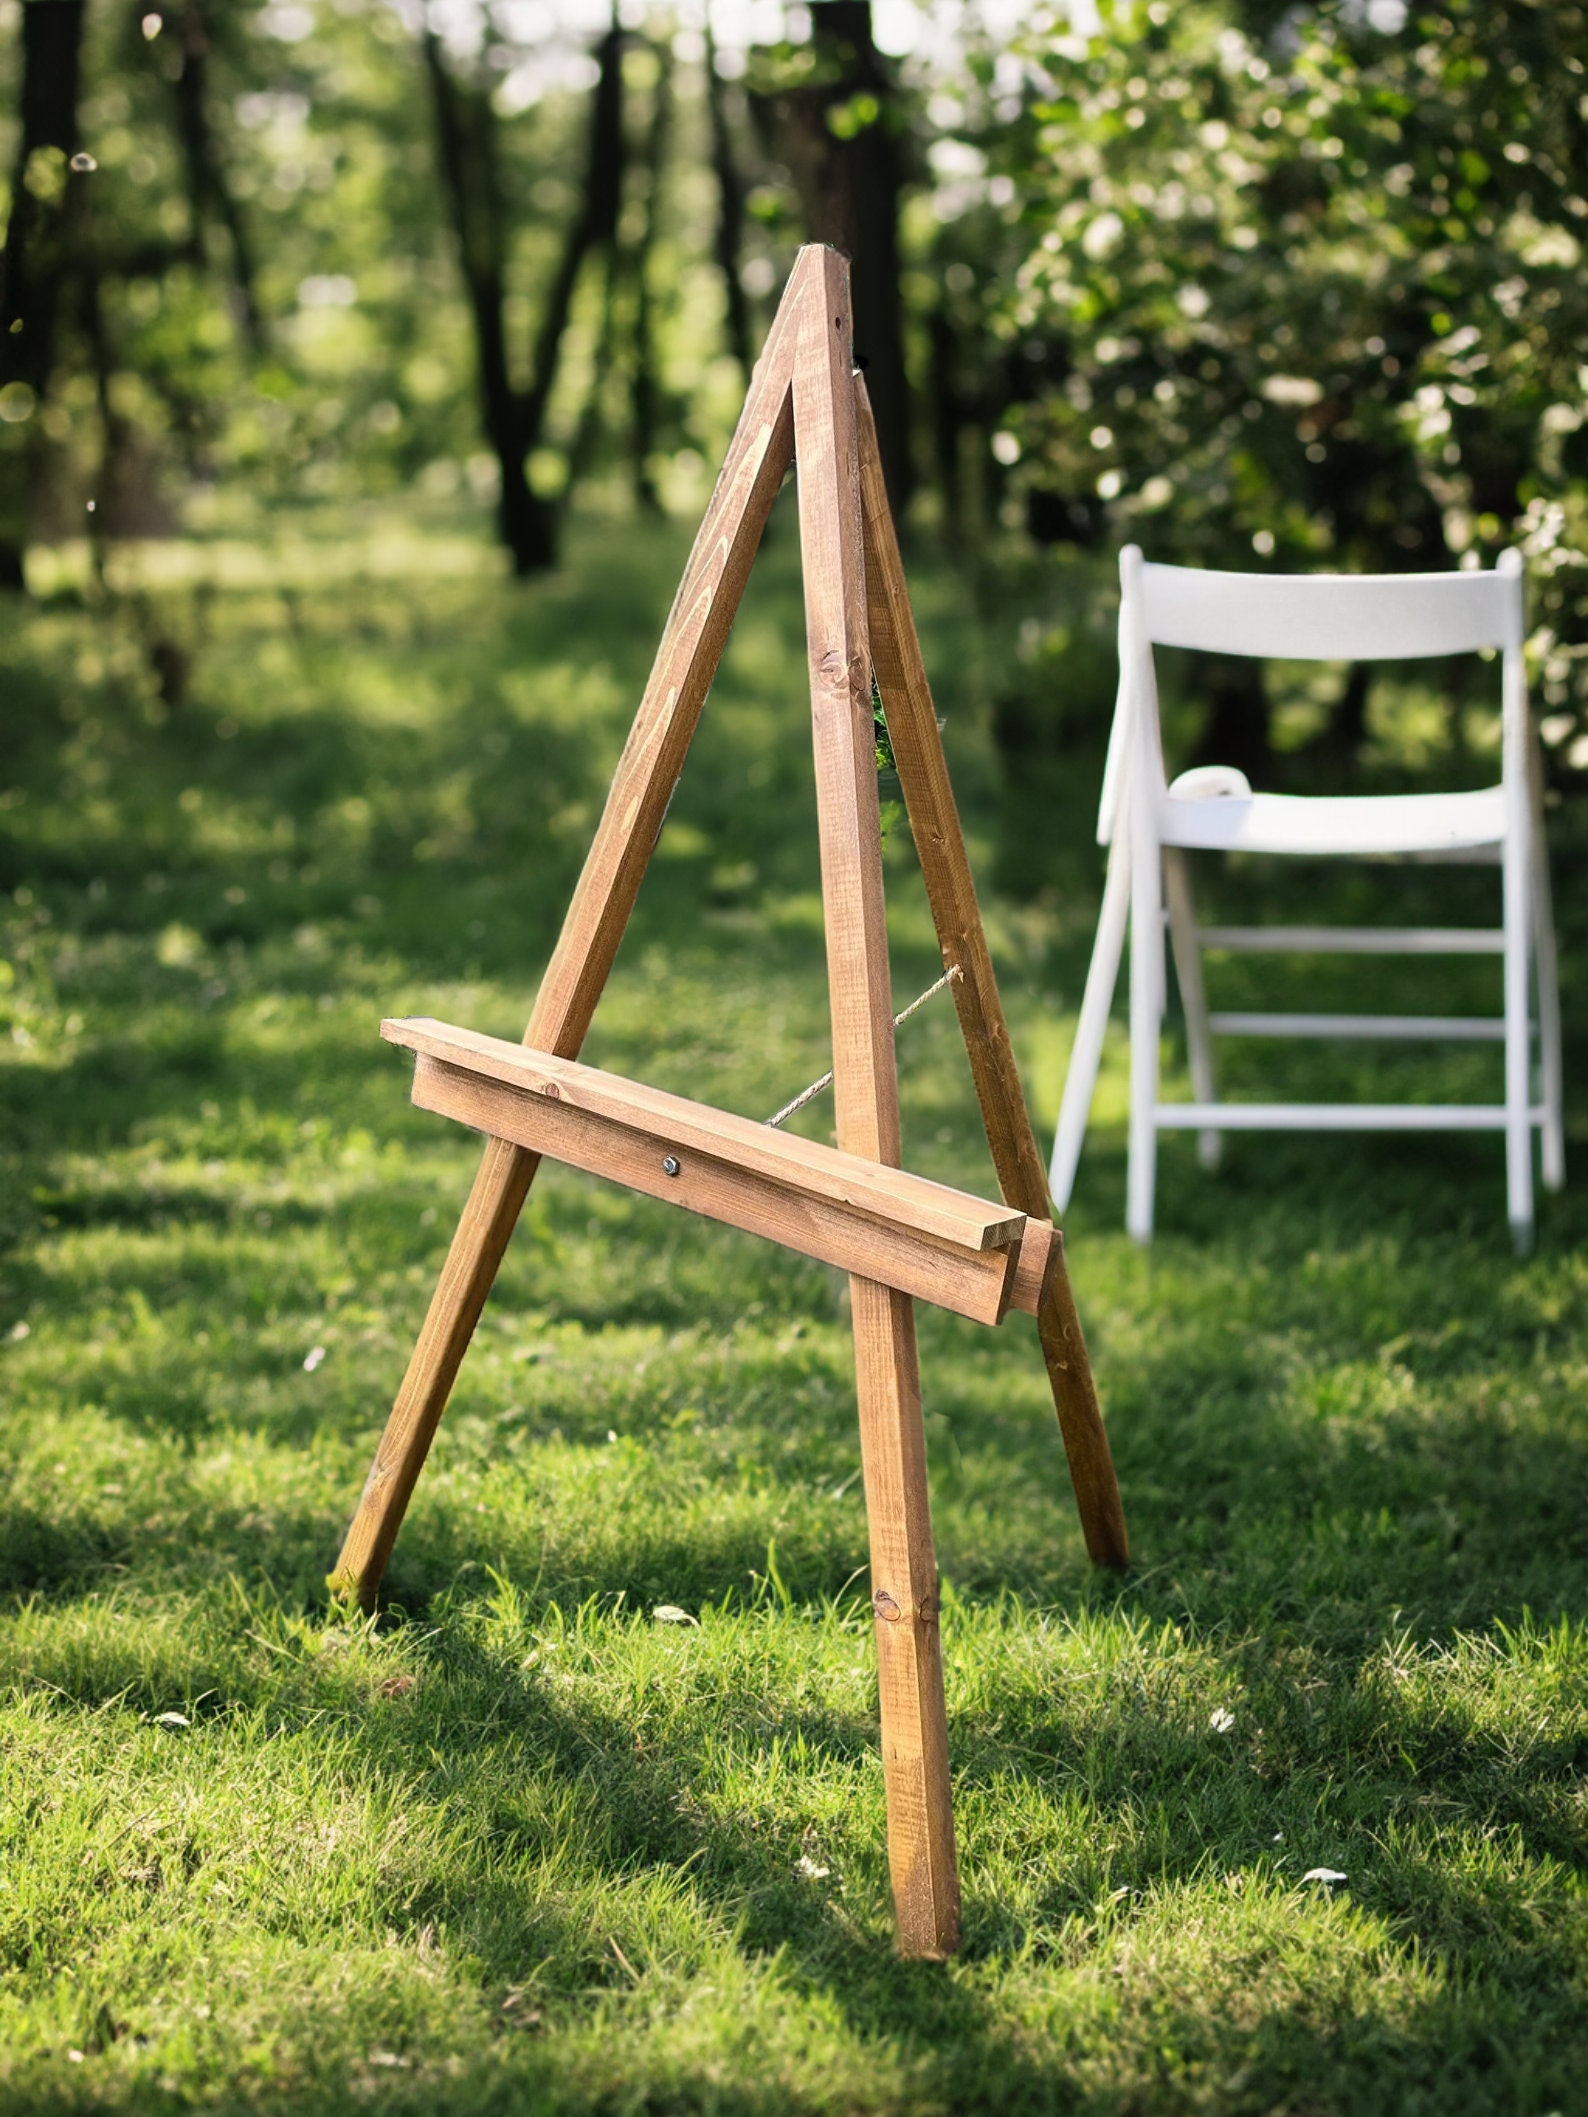 Wood Floor Easel Wedding Sign Stand Lightweight Display Large Chalkboard  Foam Board Canvas Wood Signs up to 30 X 40in . Hand Painted Colors 